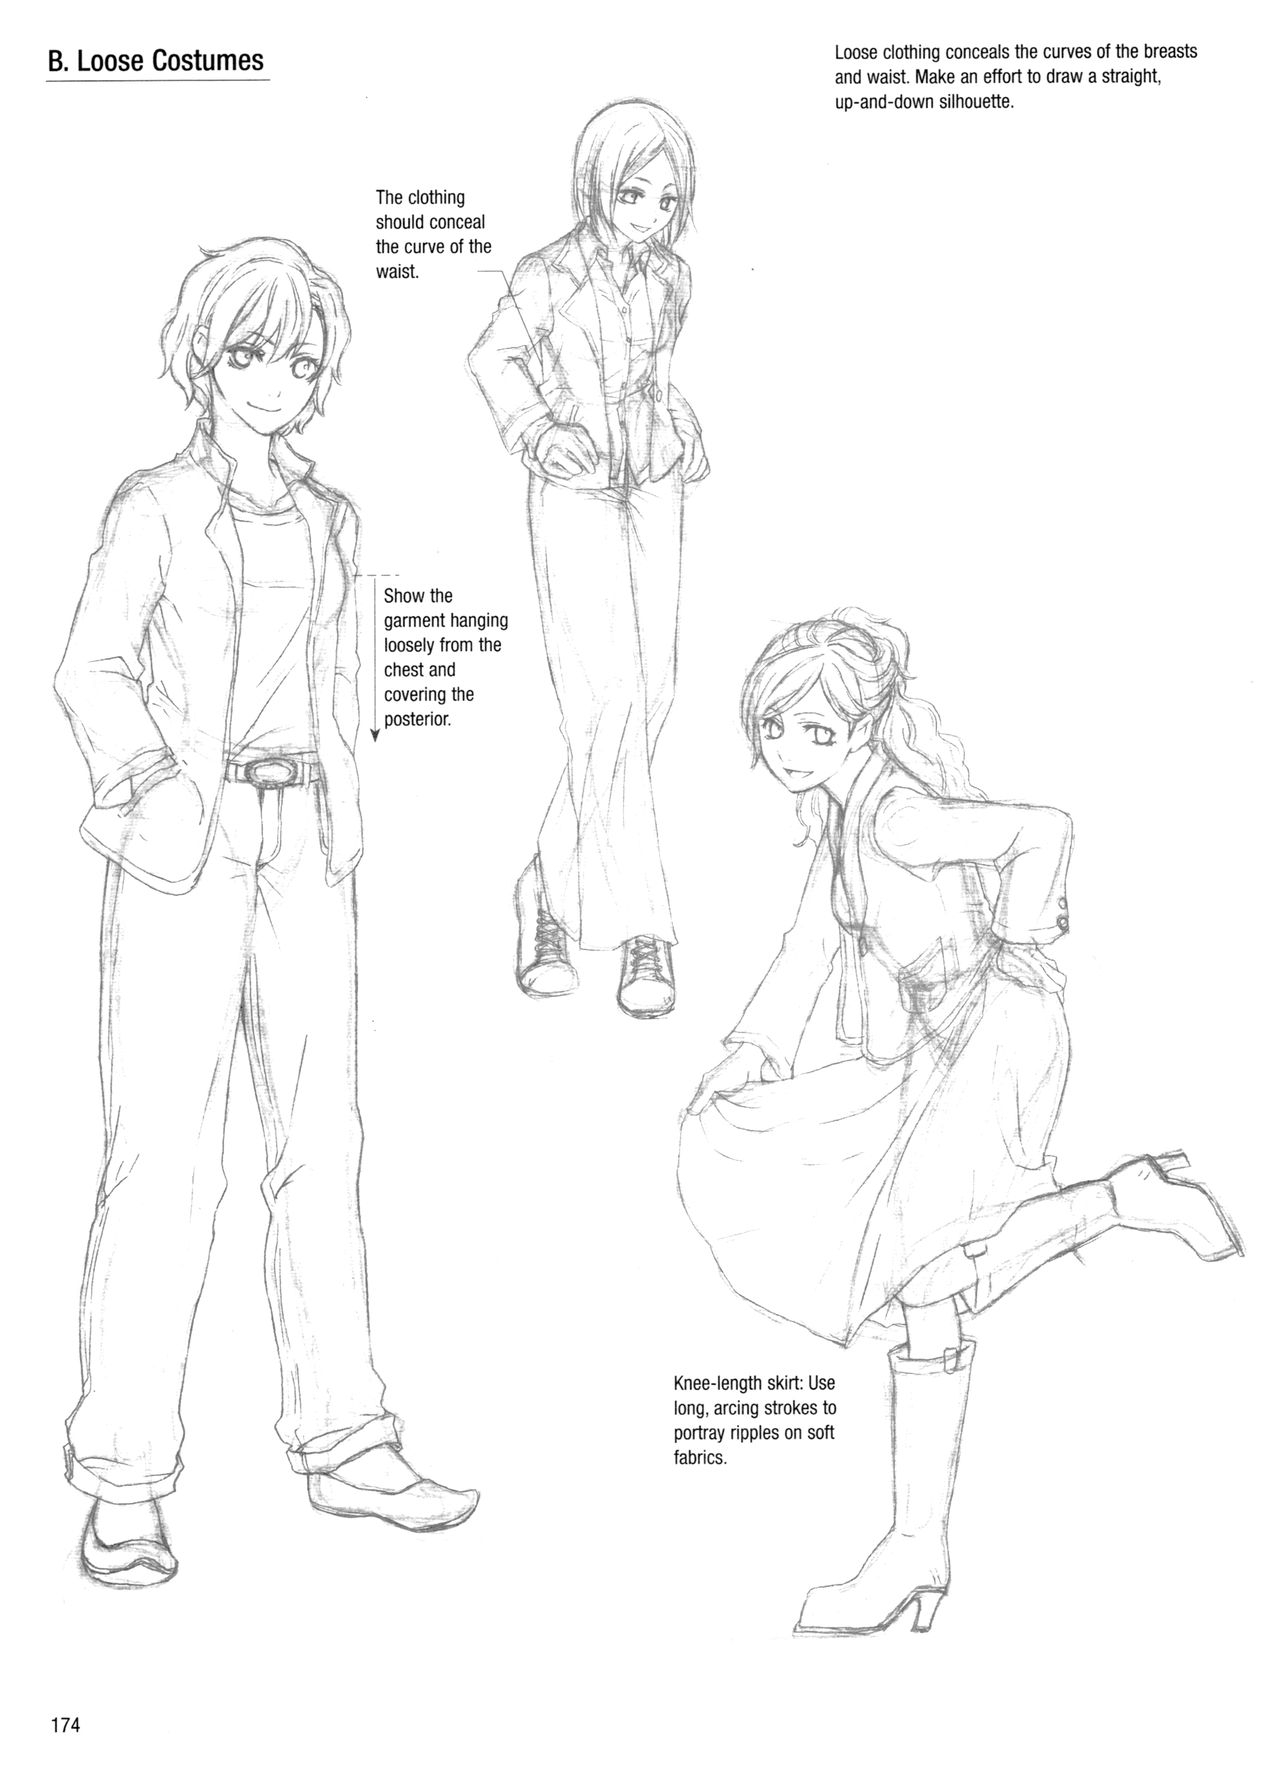 Sketching Manga-Style Vol. 3 - Unforgettable Characters 173